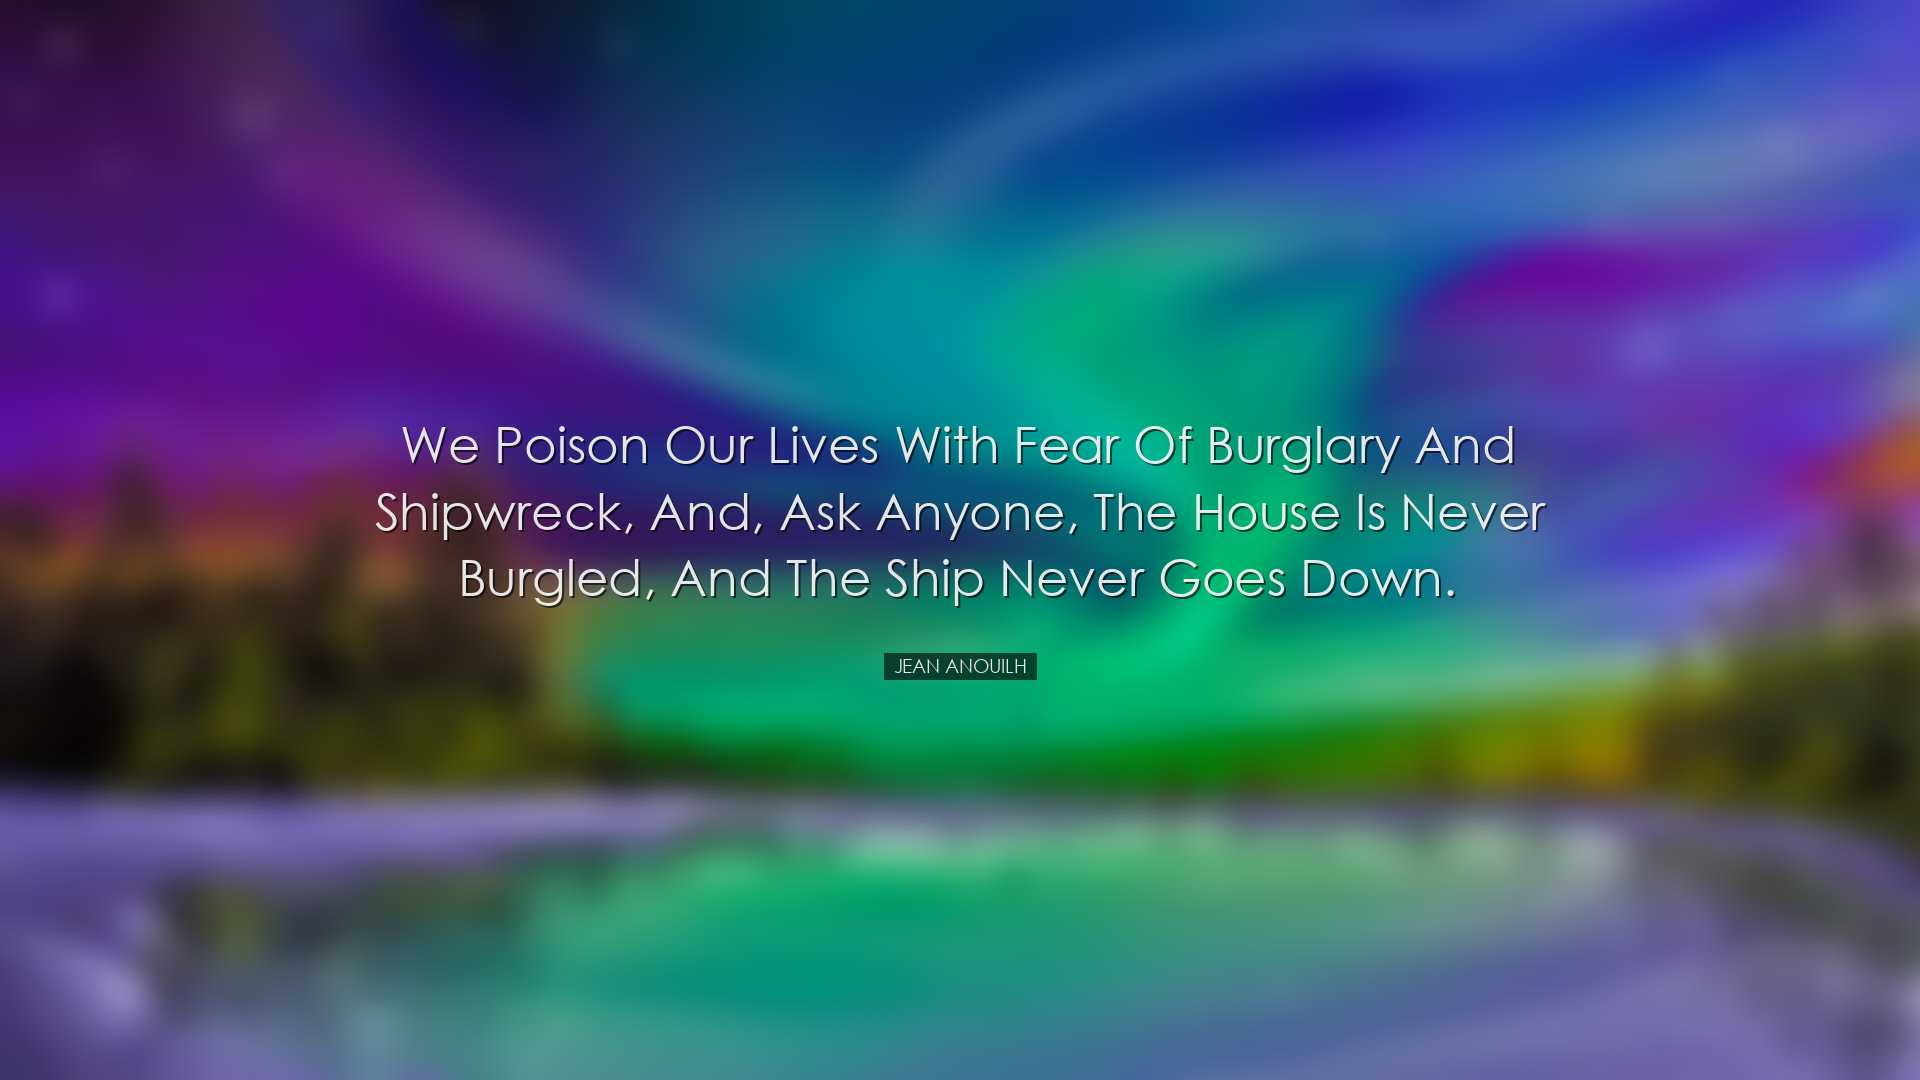 We poison our lives with fear of burglary and shipwreck, and, ask